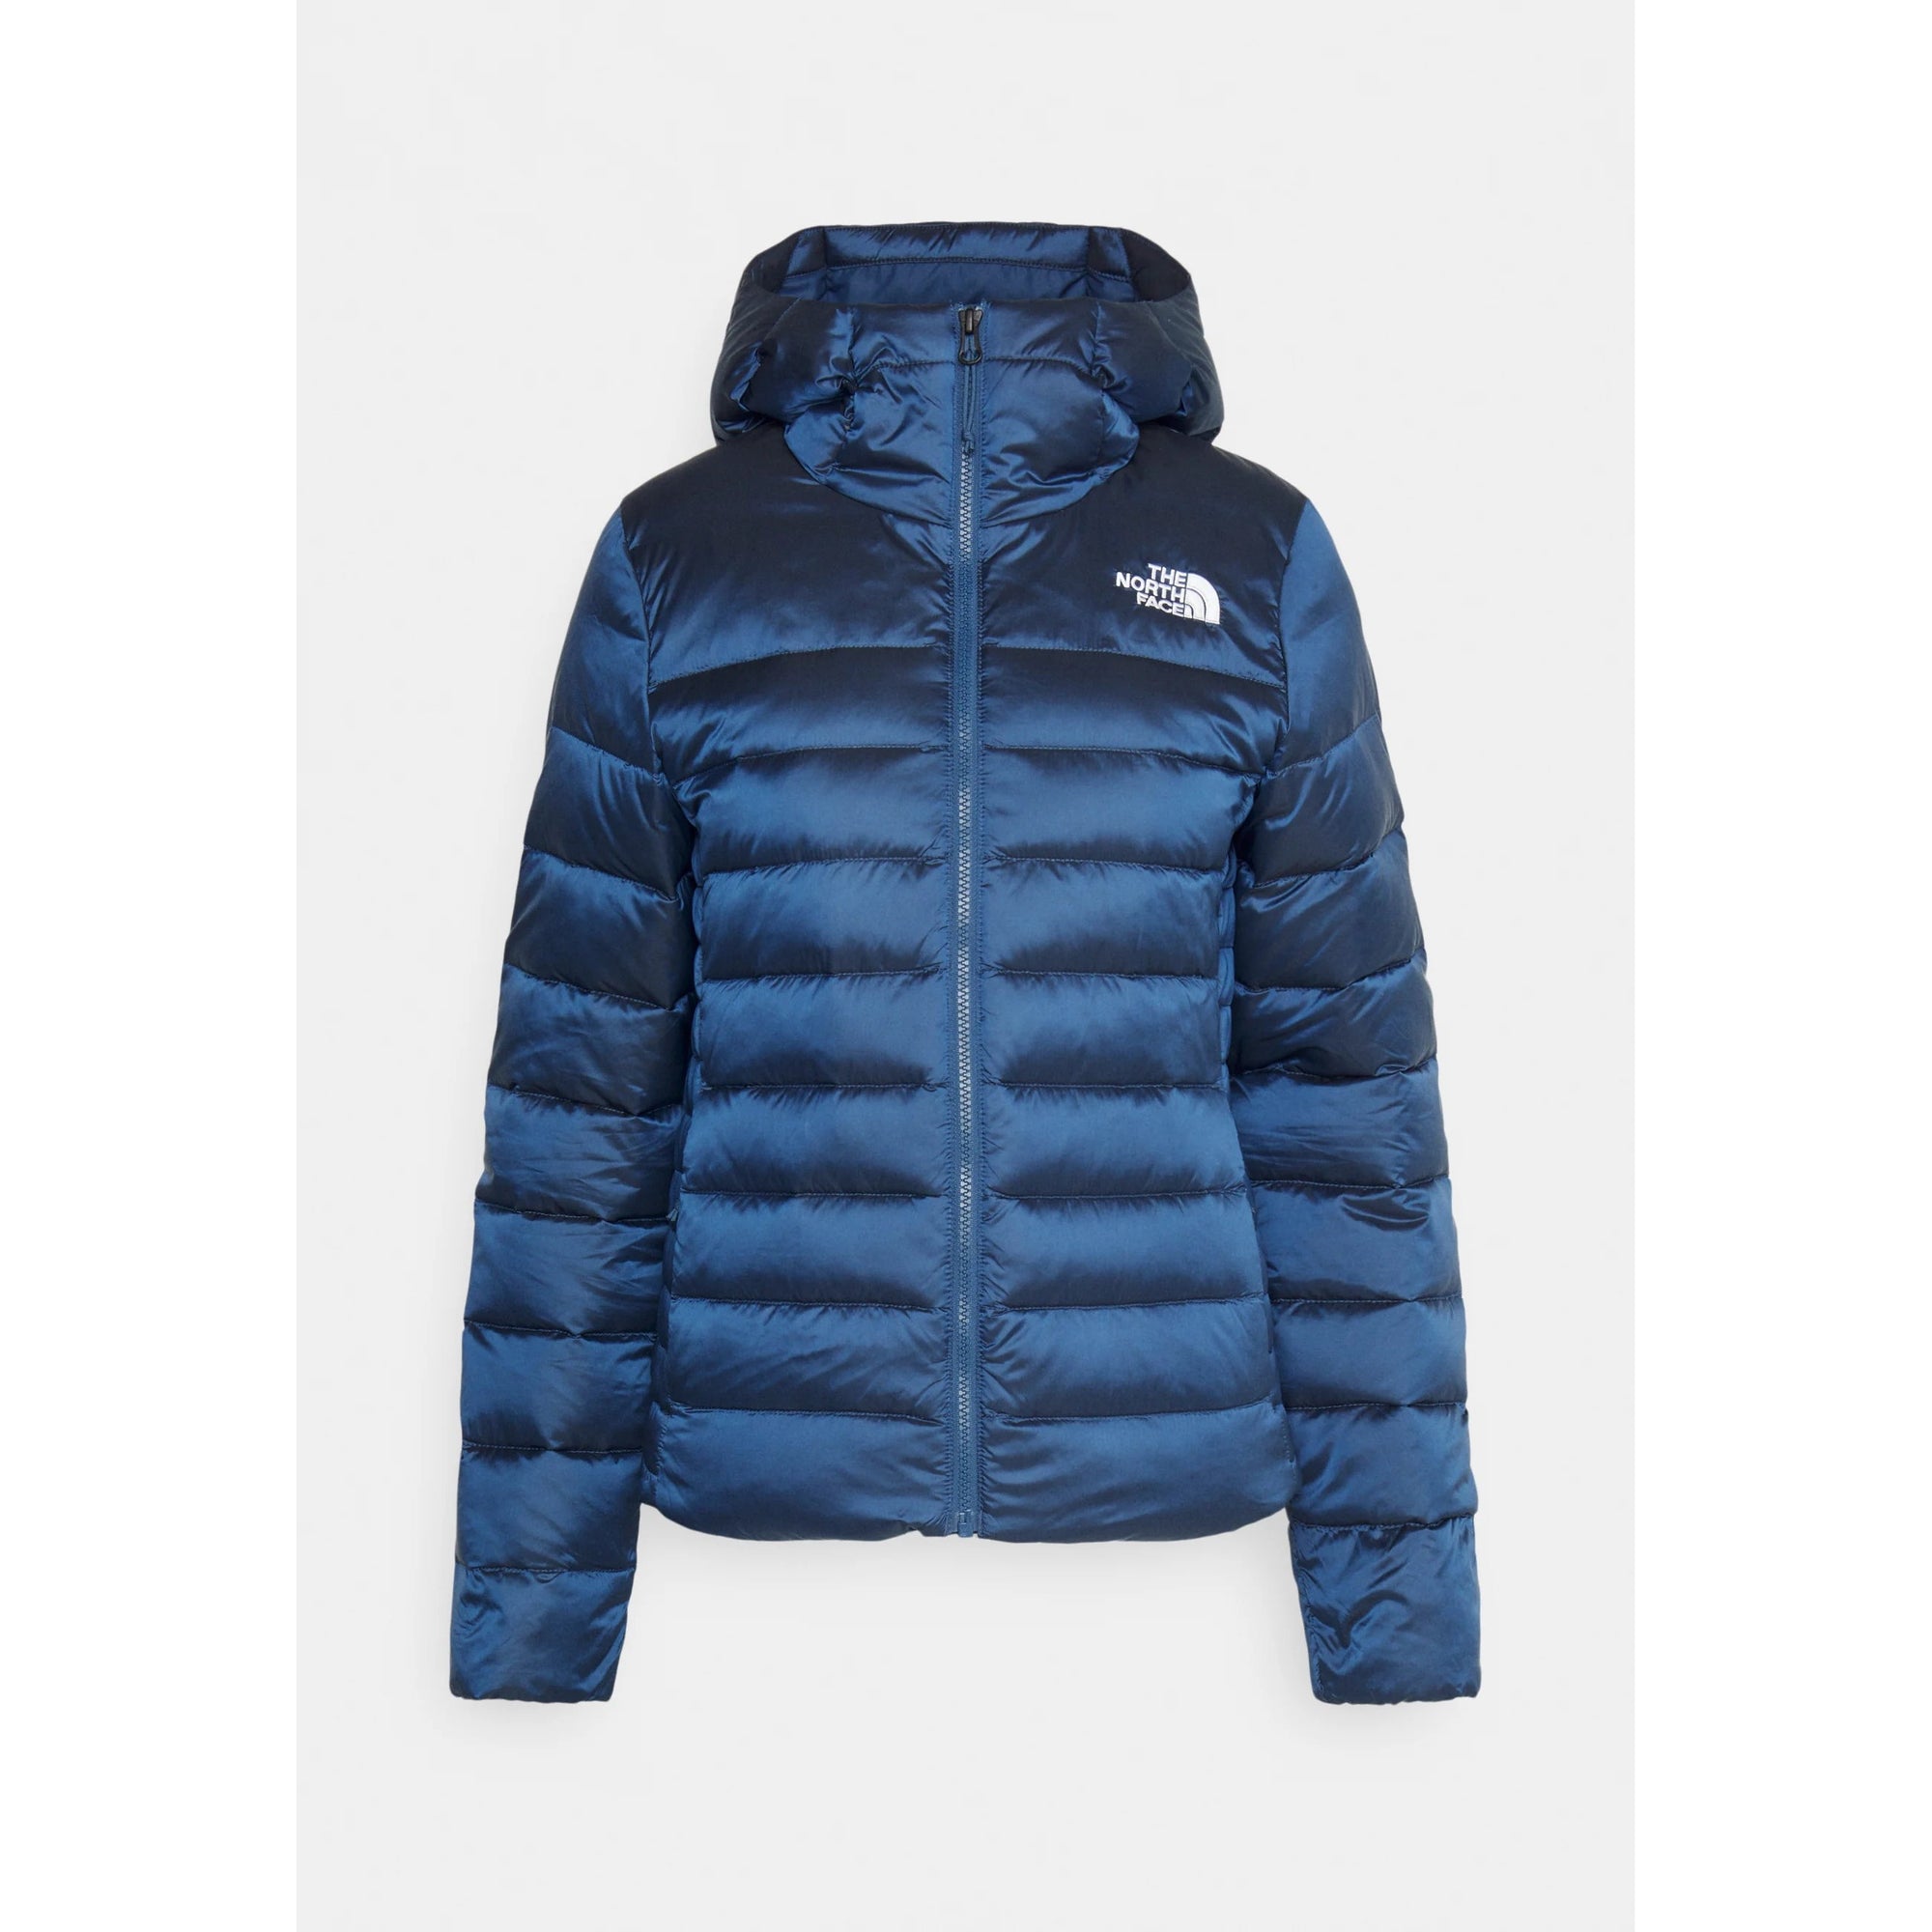 The North Face Women's Aconcagua Down Jacket